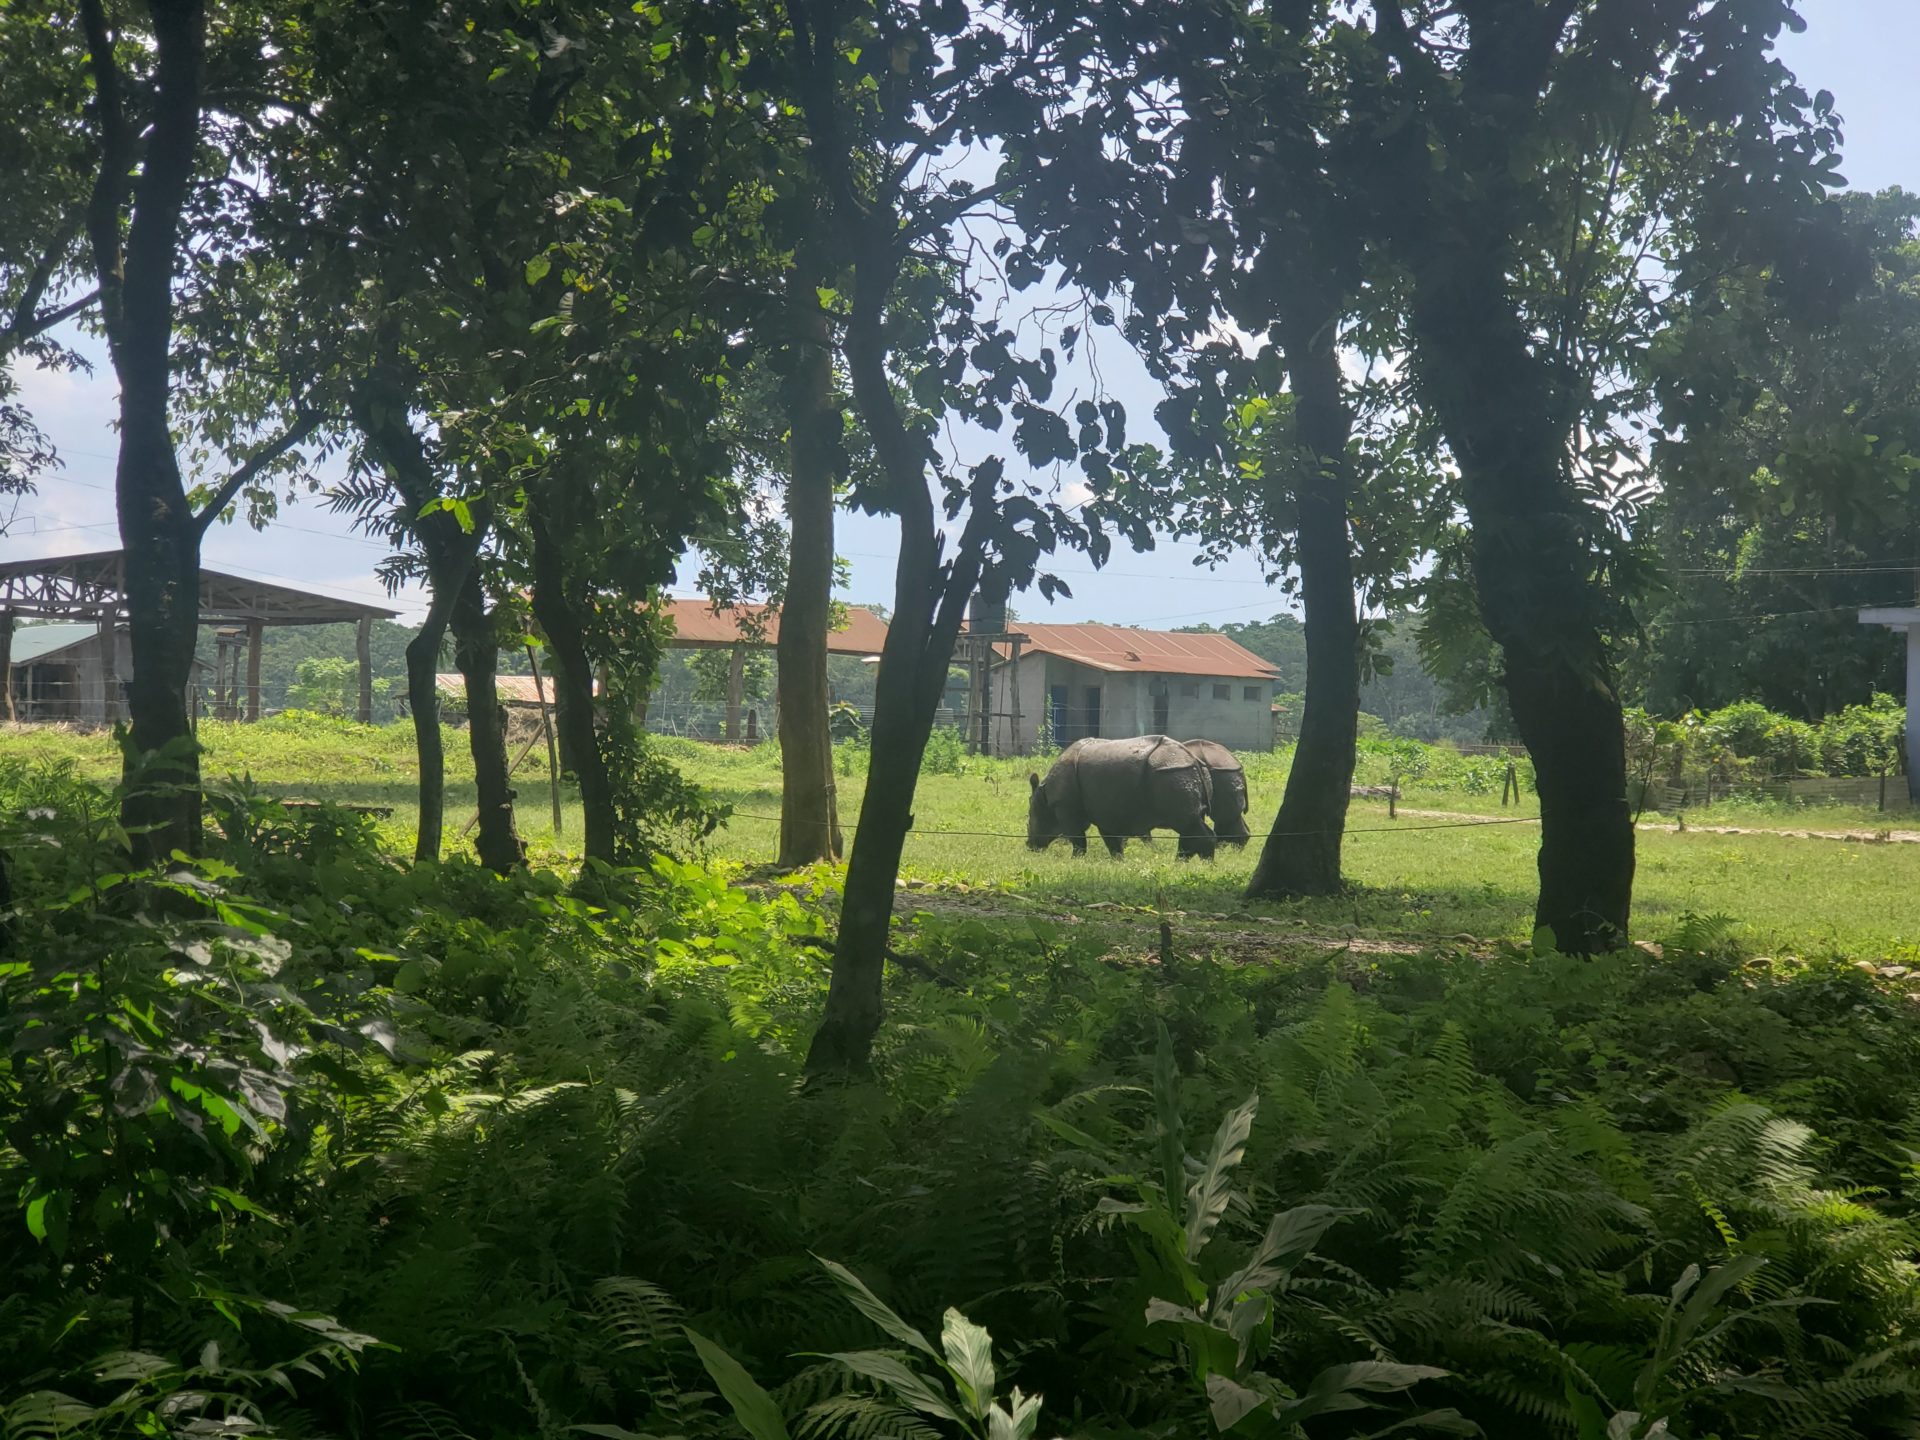 a rhinoceros in a grassy area with trees and a building